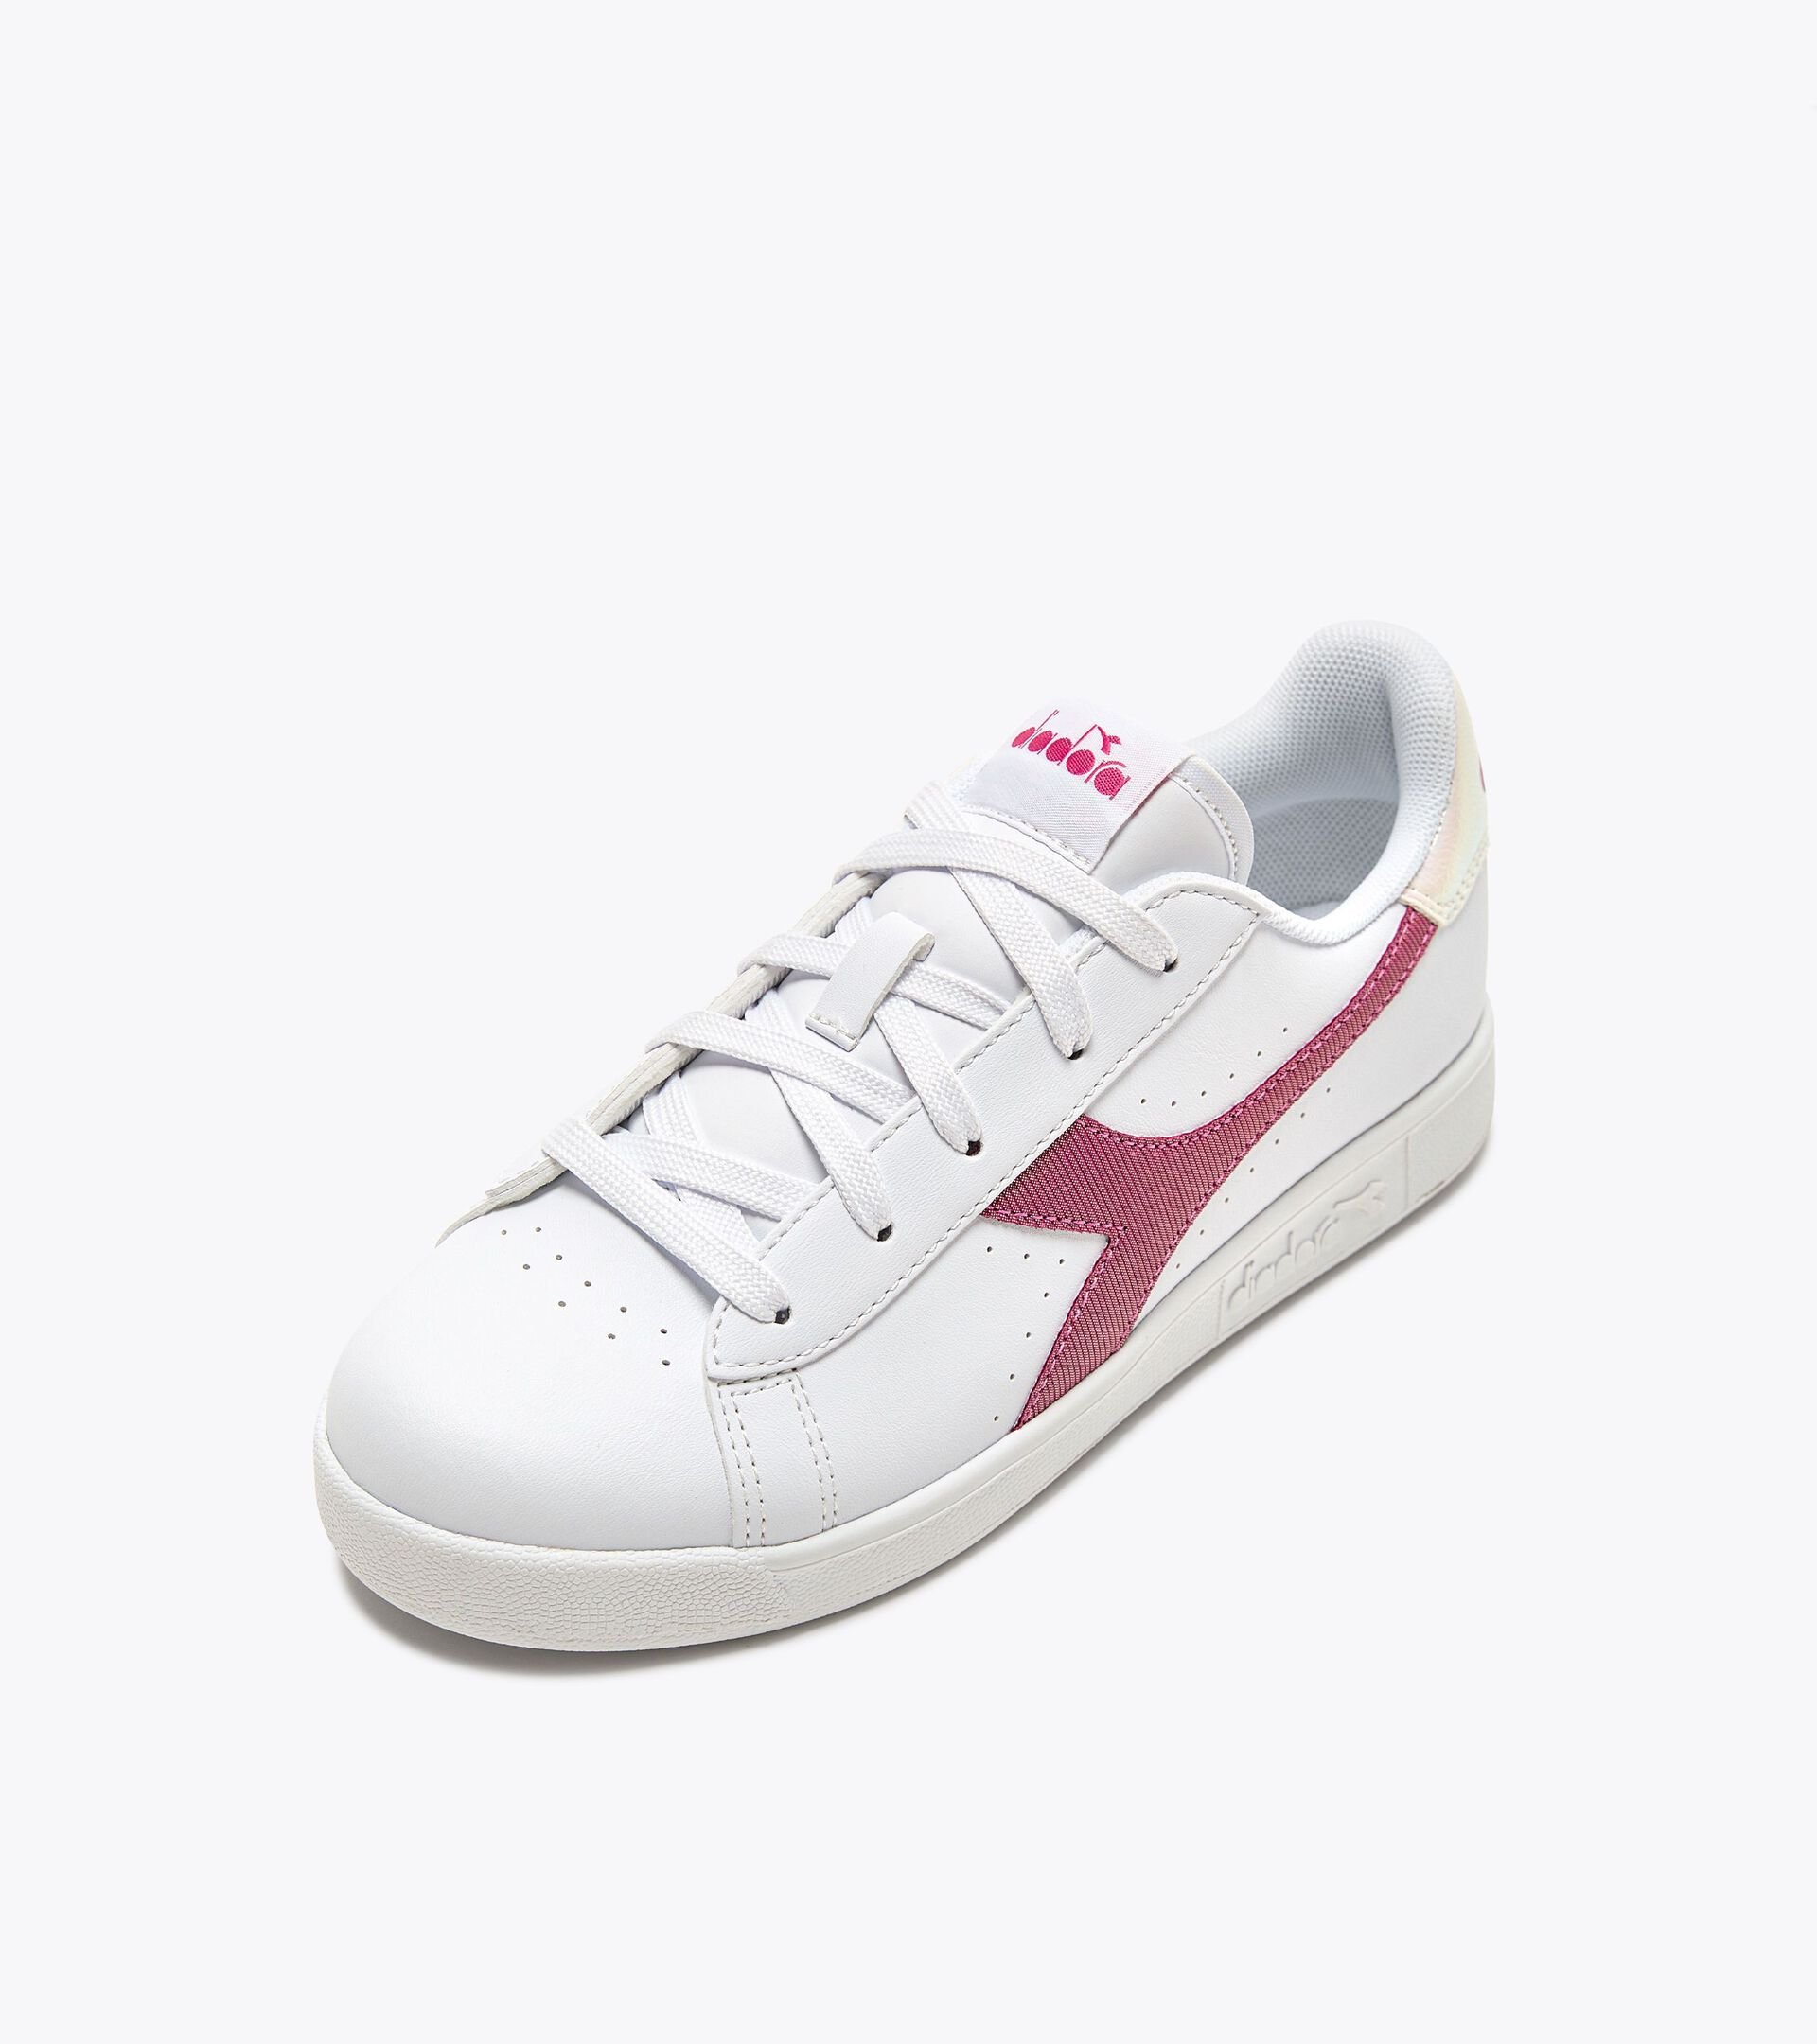 Sports shoes - Youth 8-16 years GAME P GS GIRL WHITE/CLARET RED - Diadora